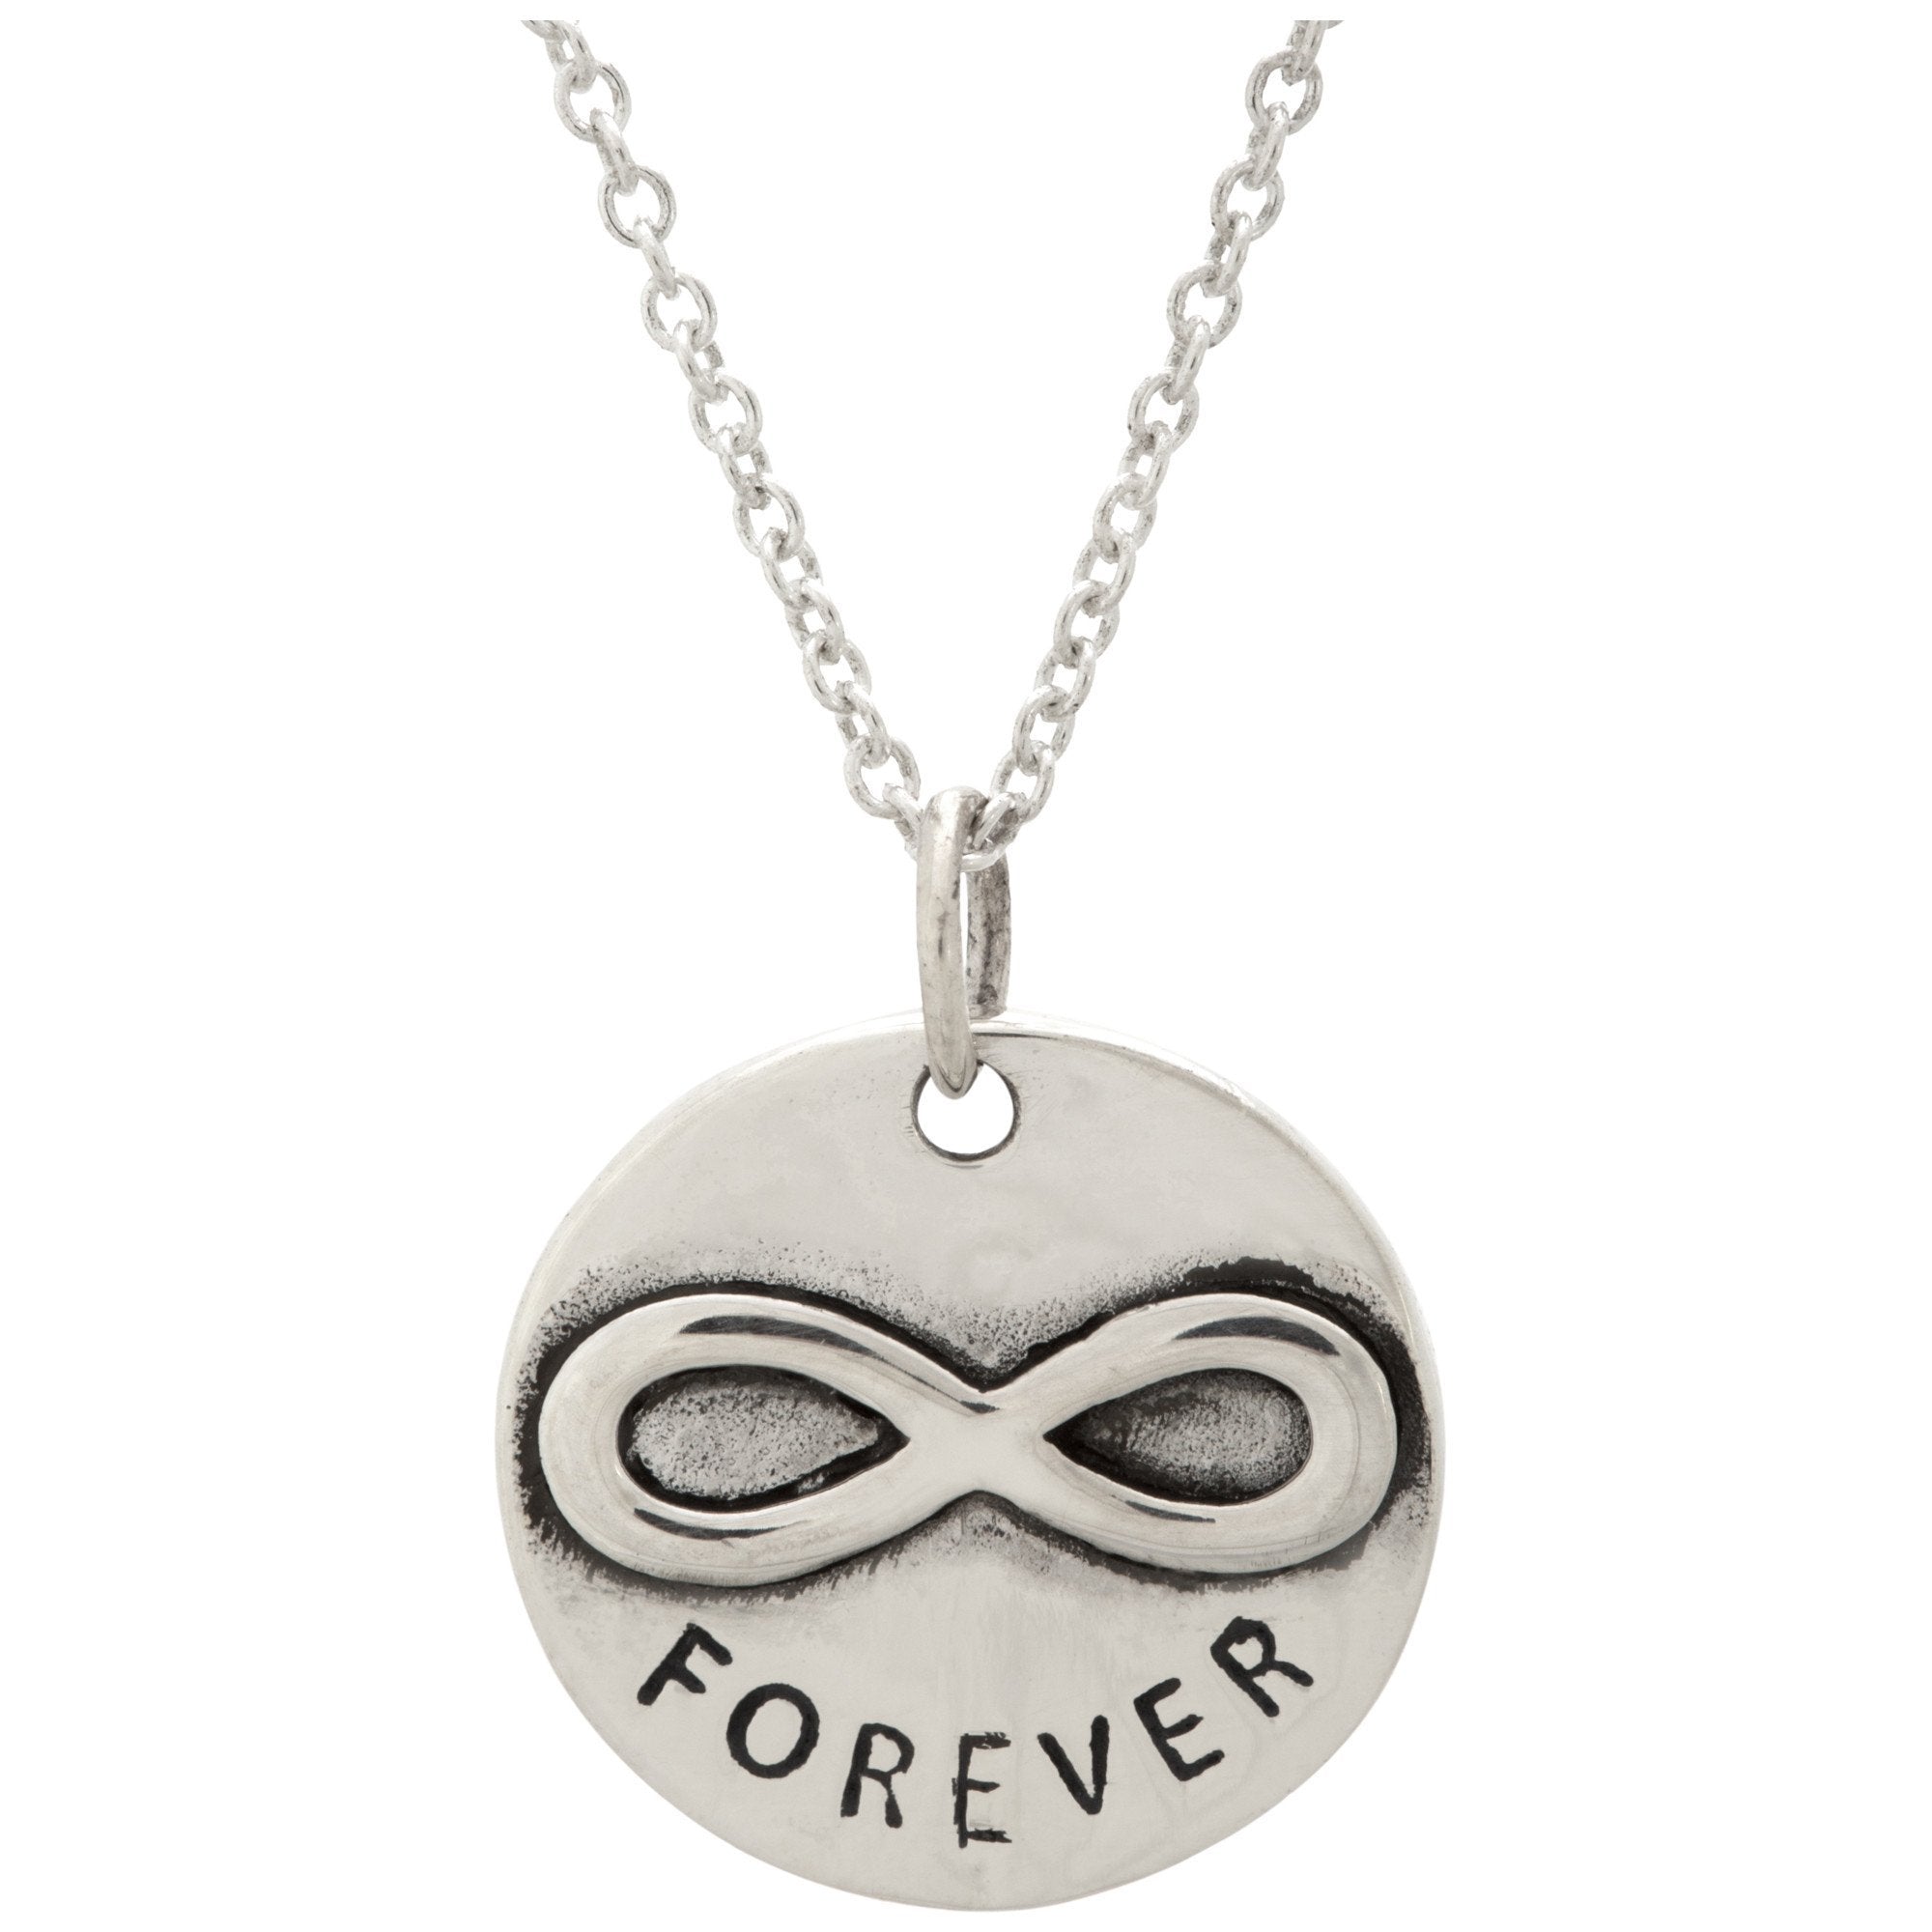 Linked Forever Sterling Necklace - Circle Pendant